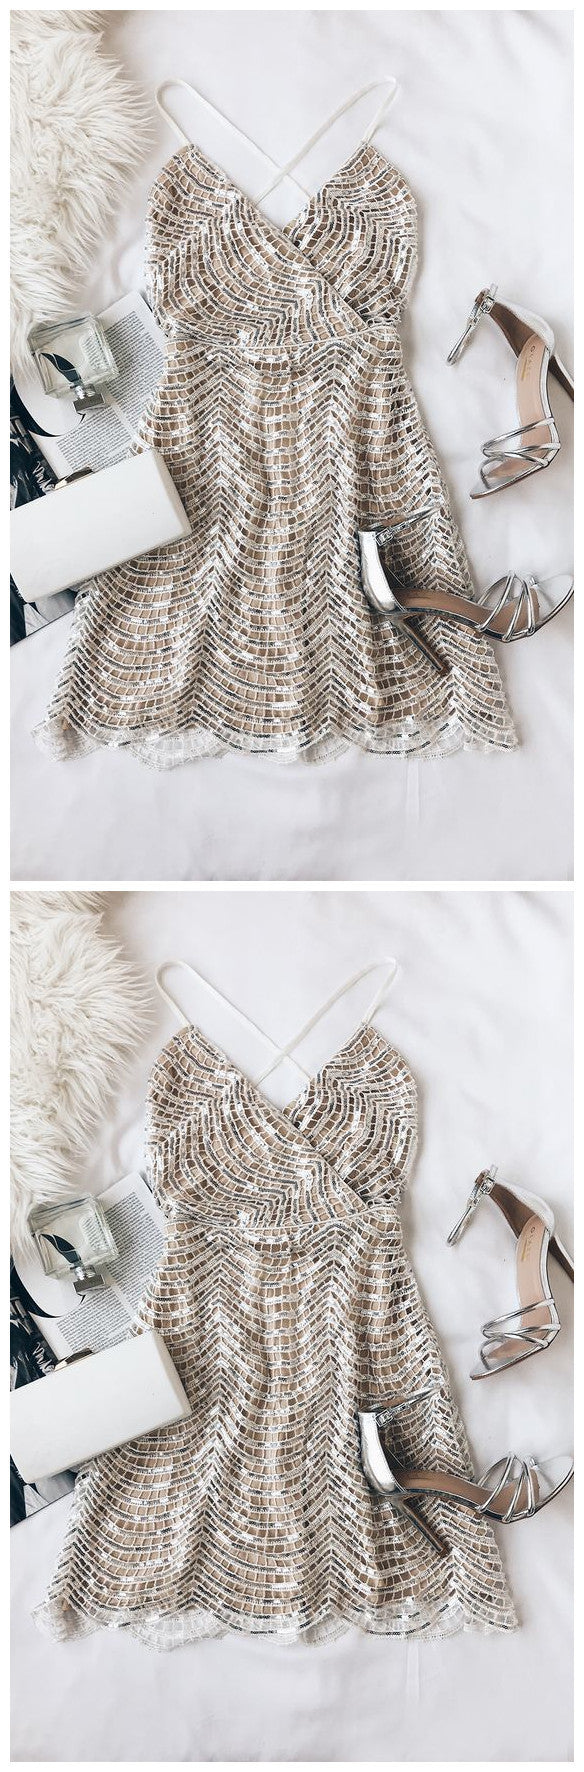 WHITE AND SILVER SEQUIN MINI homecoming DRESS cg872